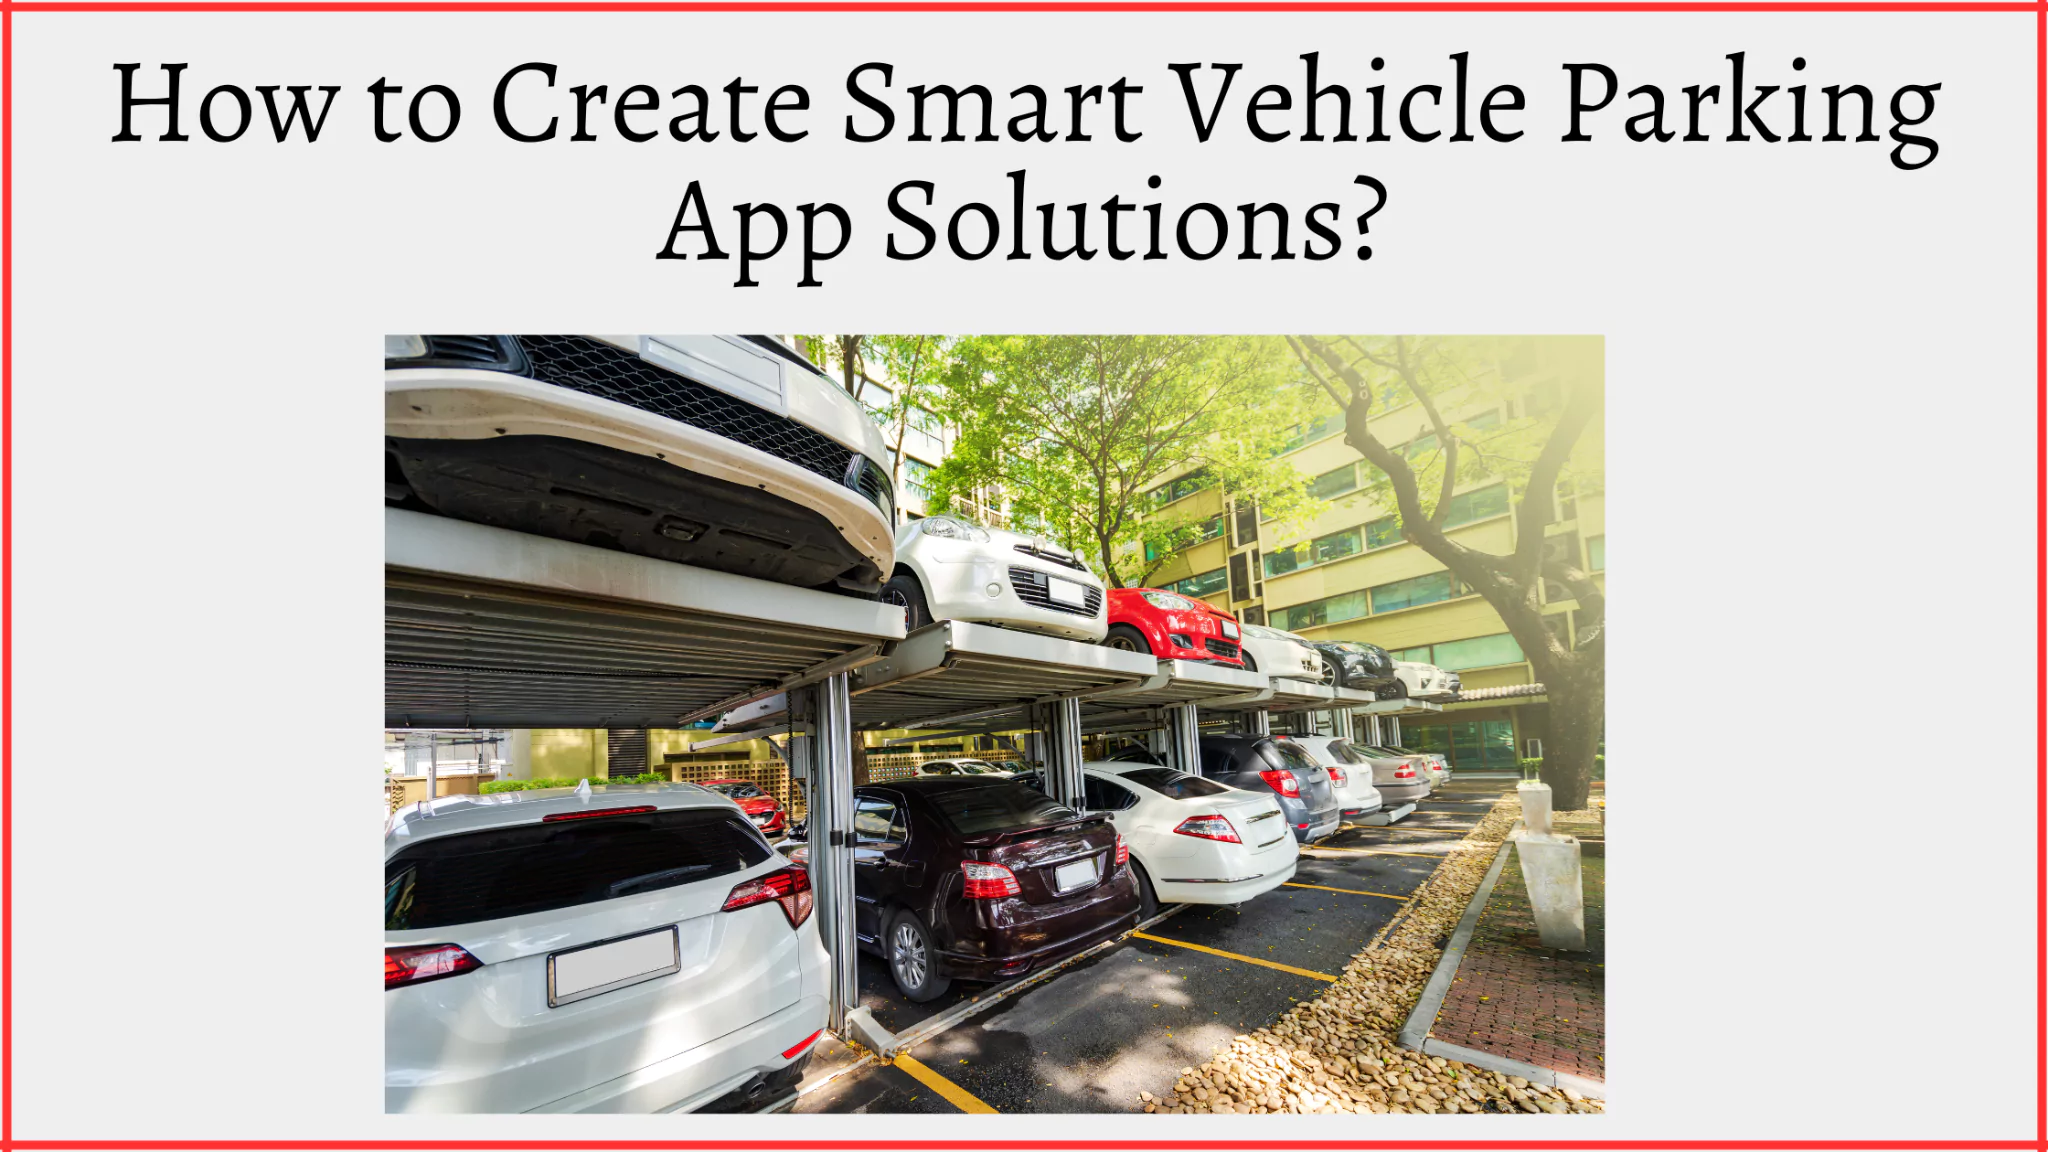 how-to-create-smart-vehicle-parking-app-solutions.webp